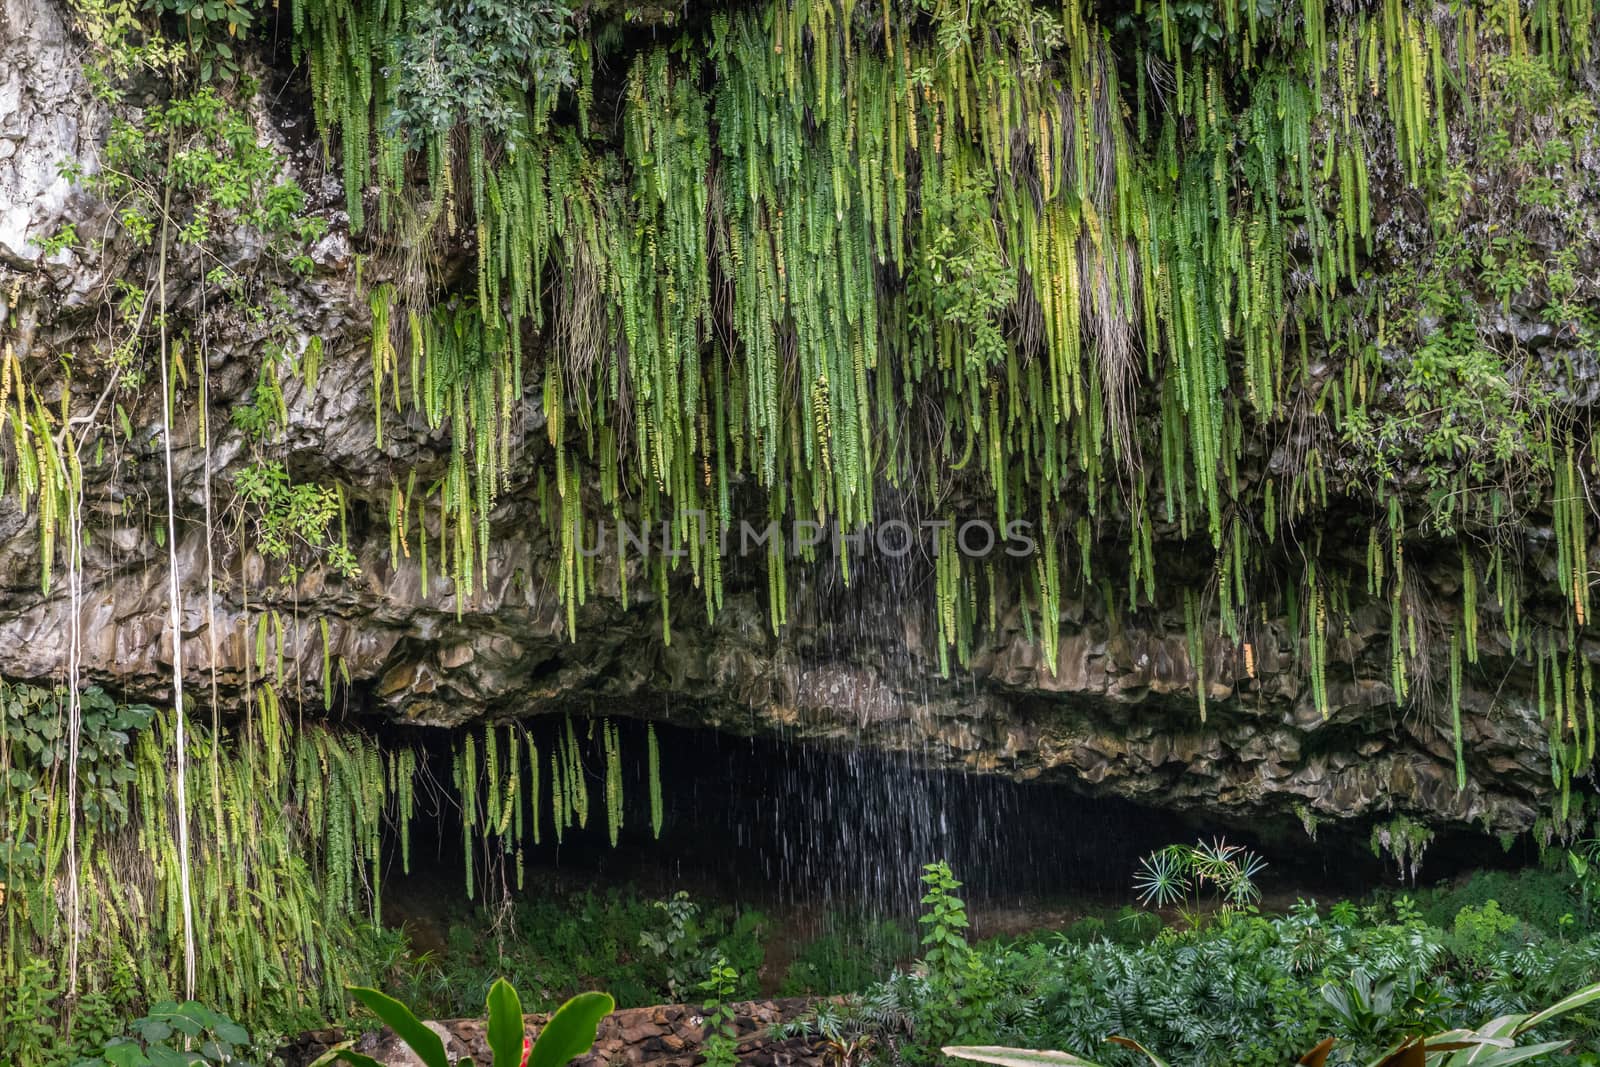 Kamokila Village, Kauai, Hawaii, USA. - January 16, 2020: Green sword ferns hang and water falls over Fern grotto in brown and black lava rock cliff. Plenty of other green plants.